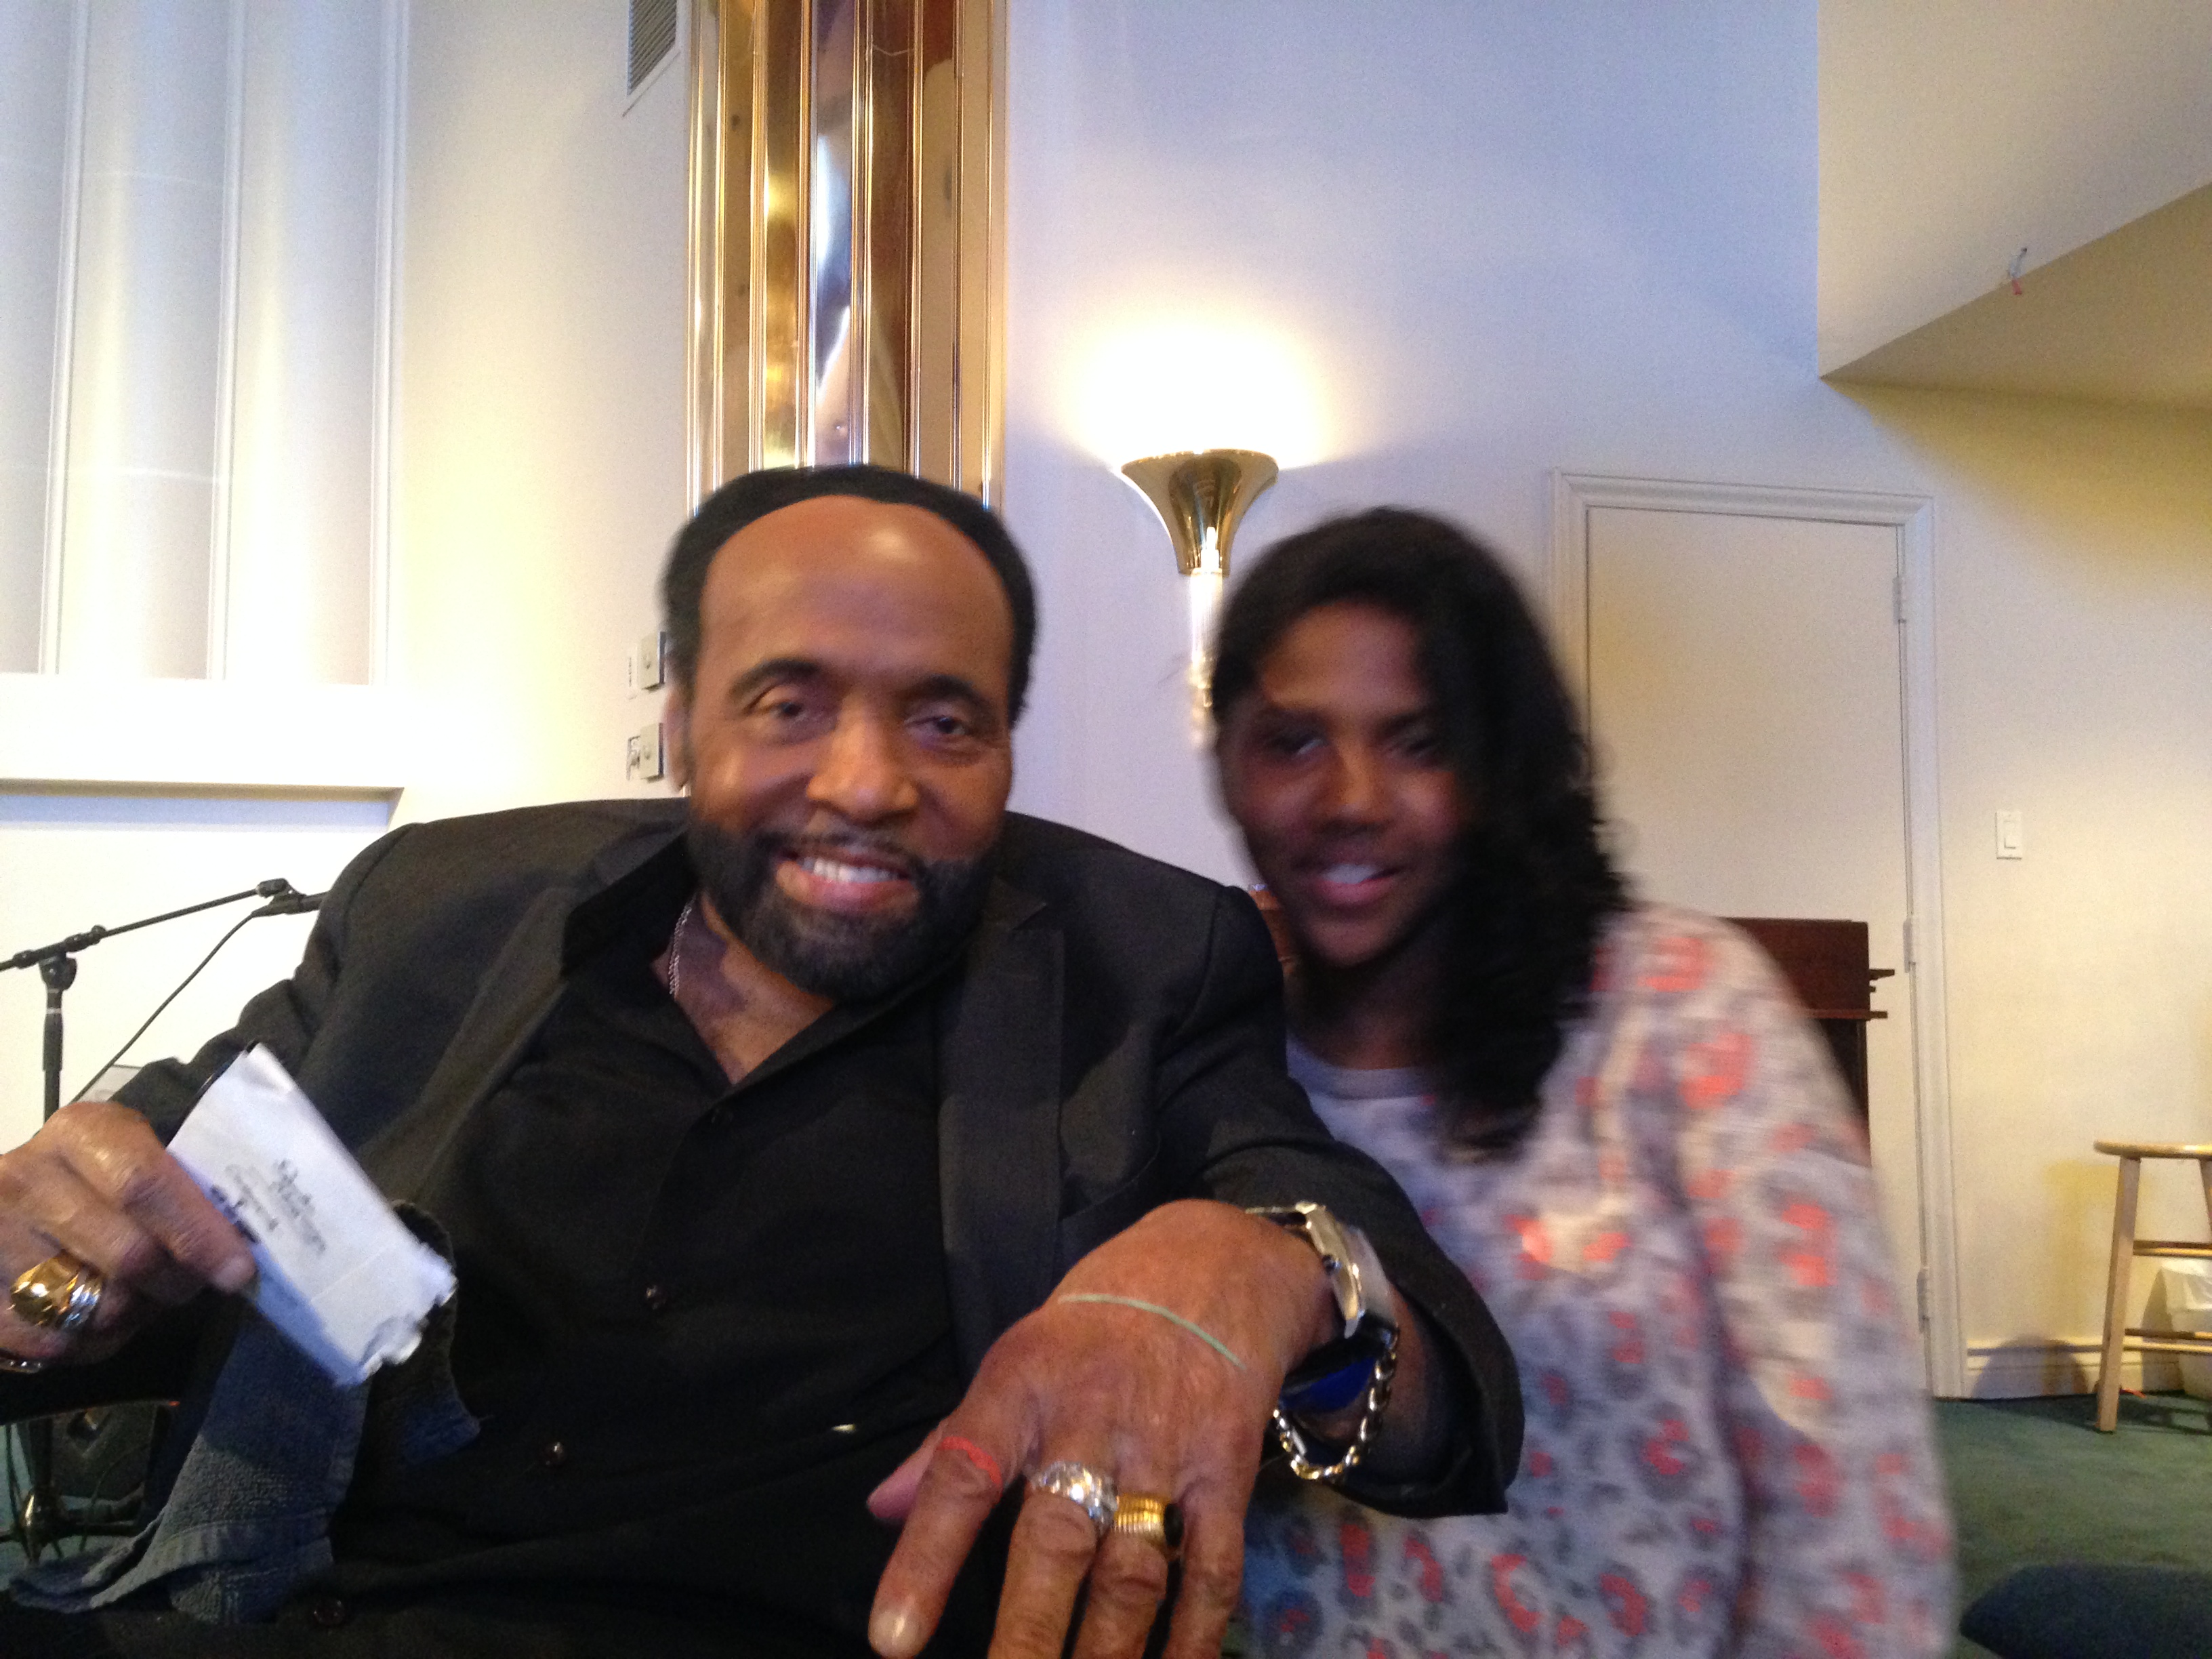 Pastor Andrae Crouch and Actress/Singer Kiera Washington at New Christ Memorial Church of God in Christ, Pacoima, California